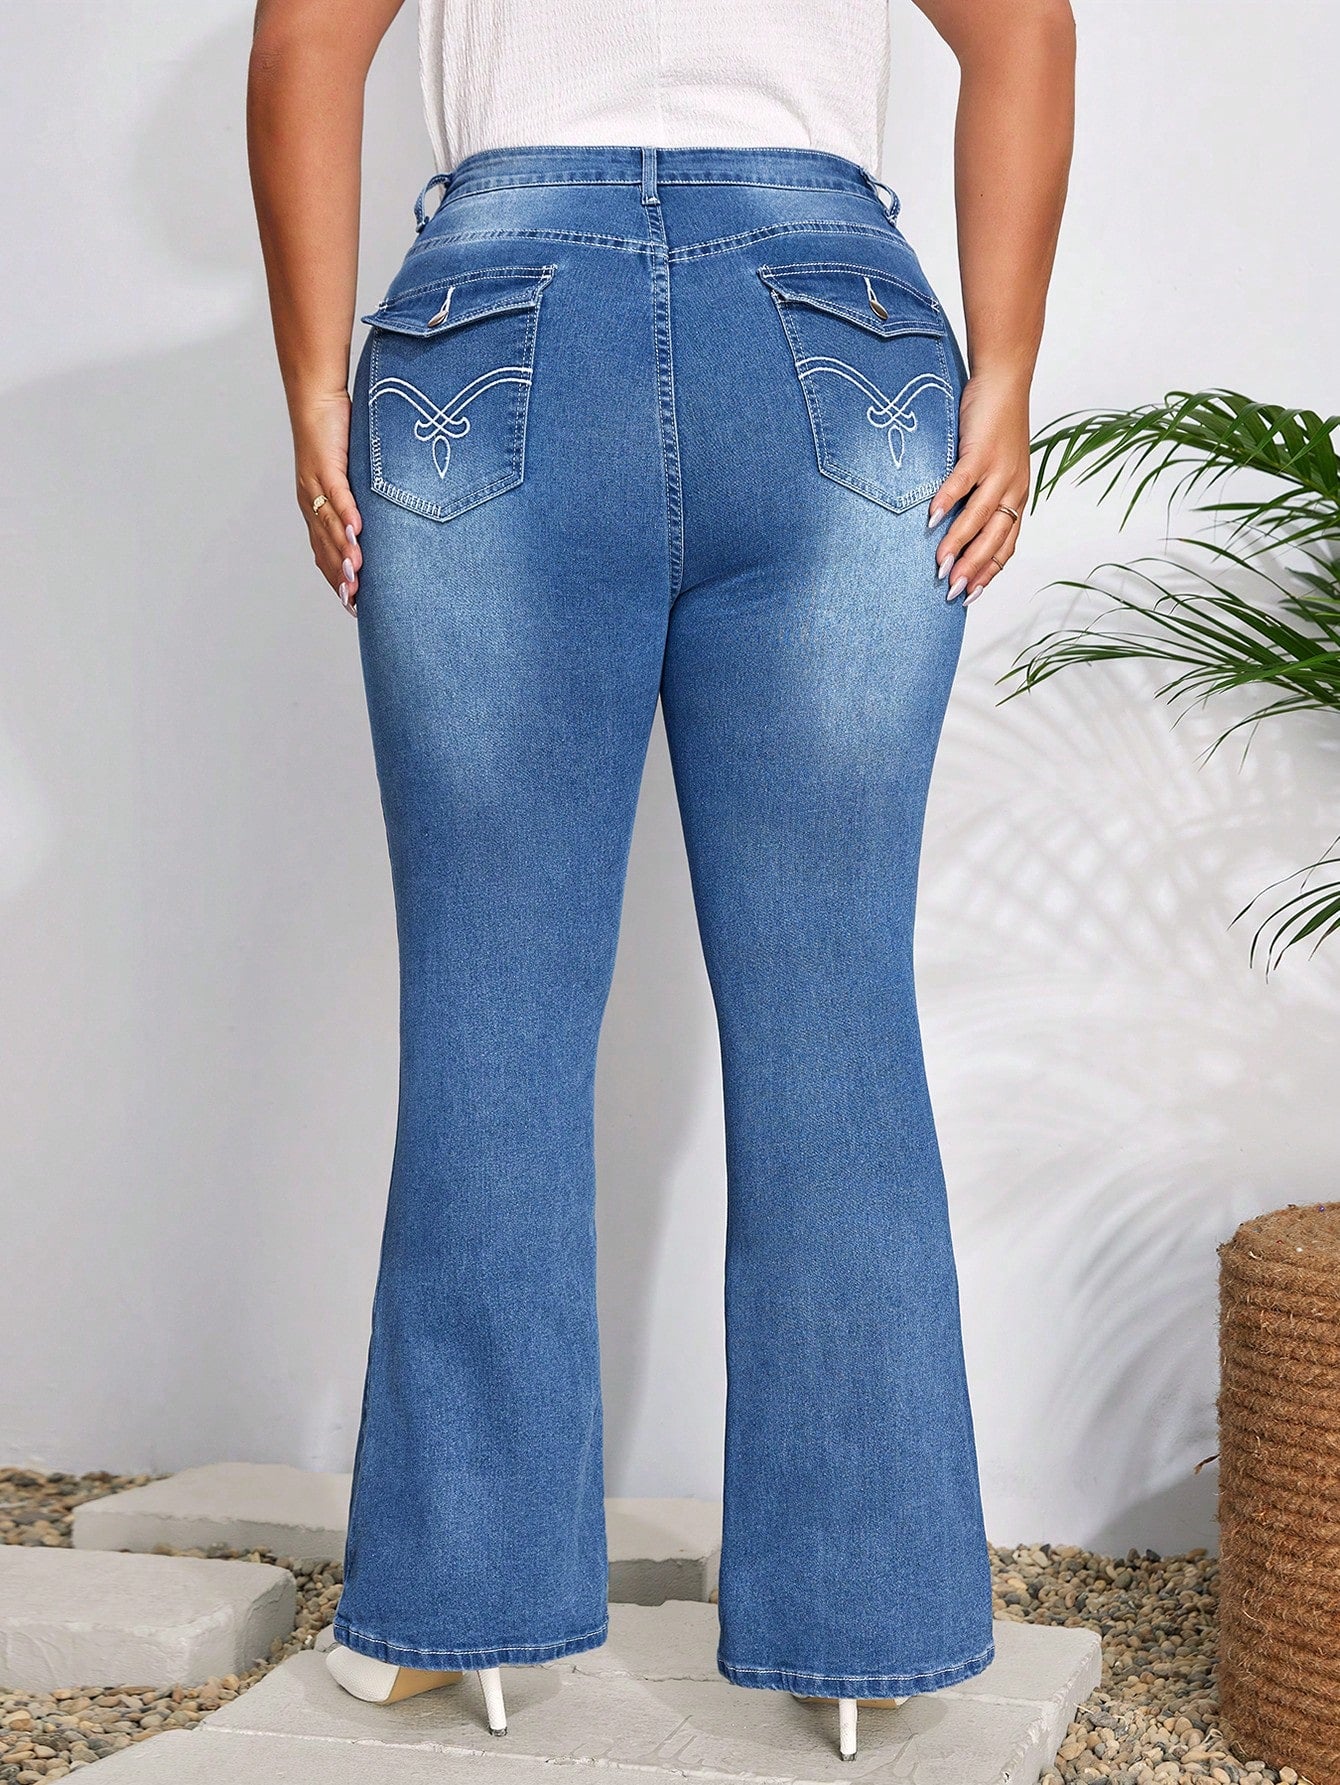 Plus Size Women Embroidery Inserted Pockets Bell Bottom Jeans